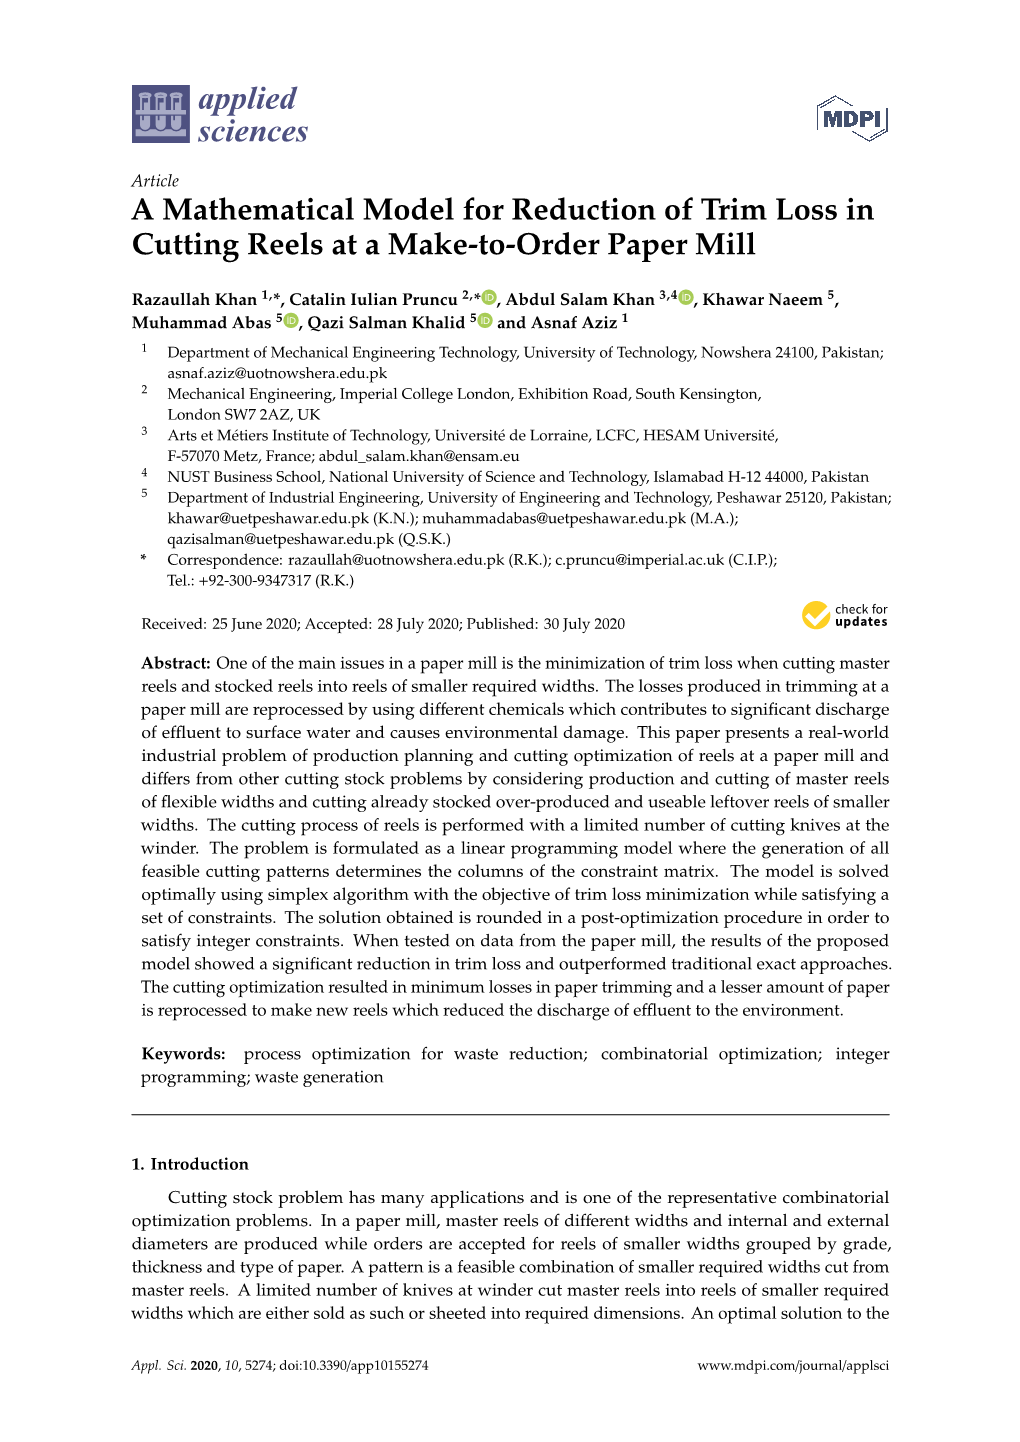 A Mathematical Model for Reduction of Trim Loss in Cutting Reels at a Make-To-Order Paper Mill